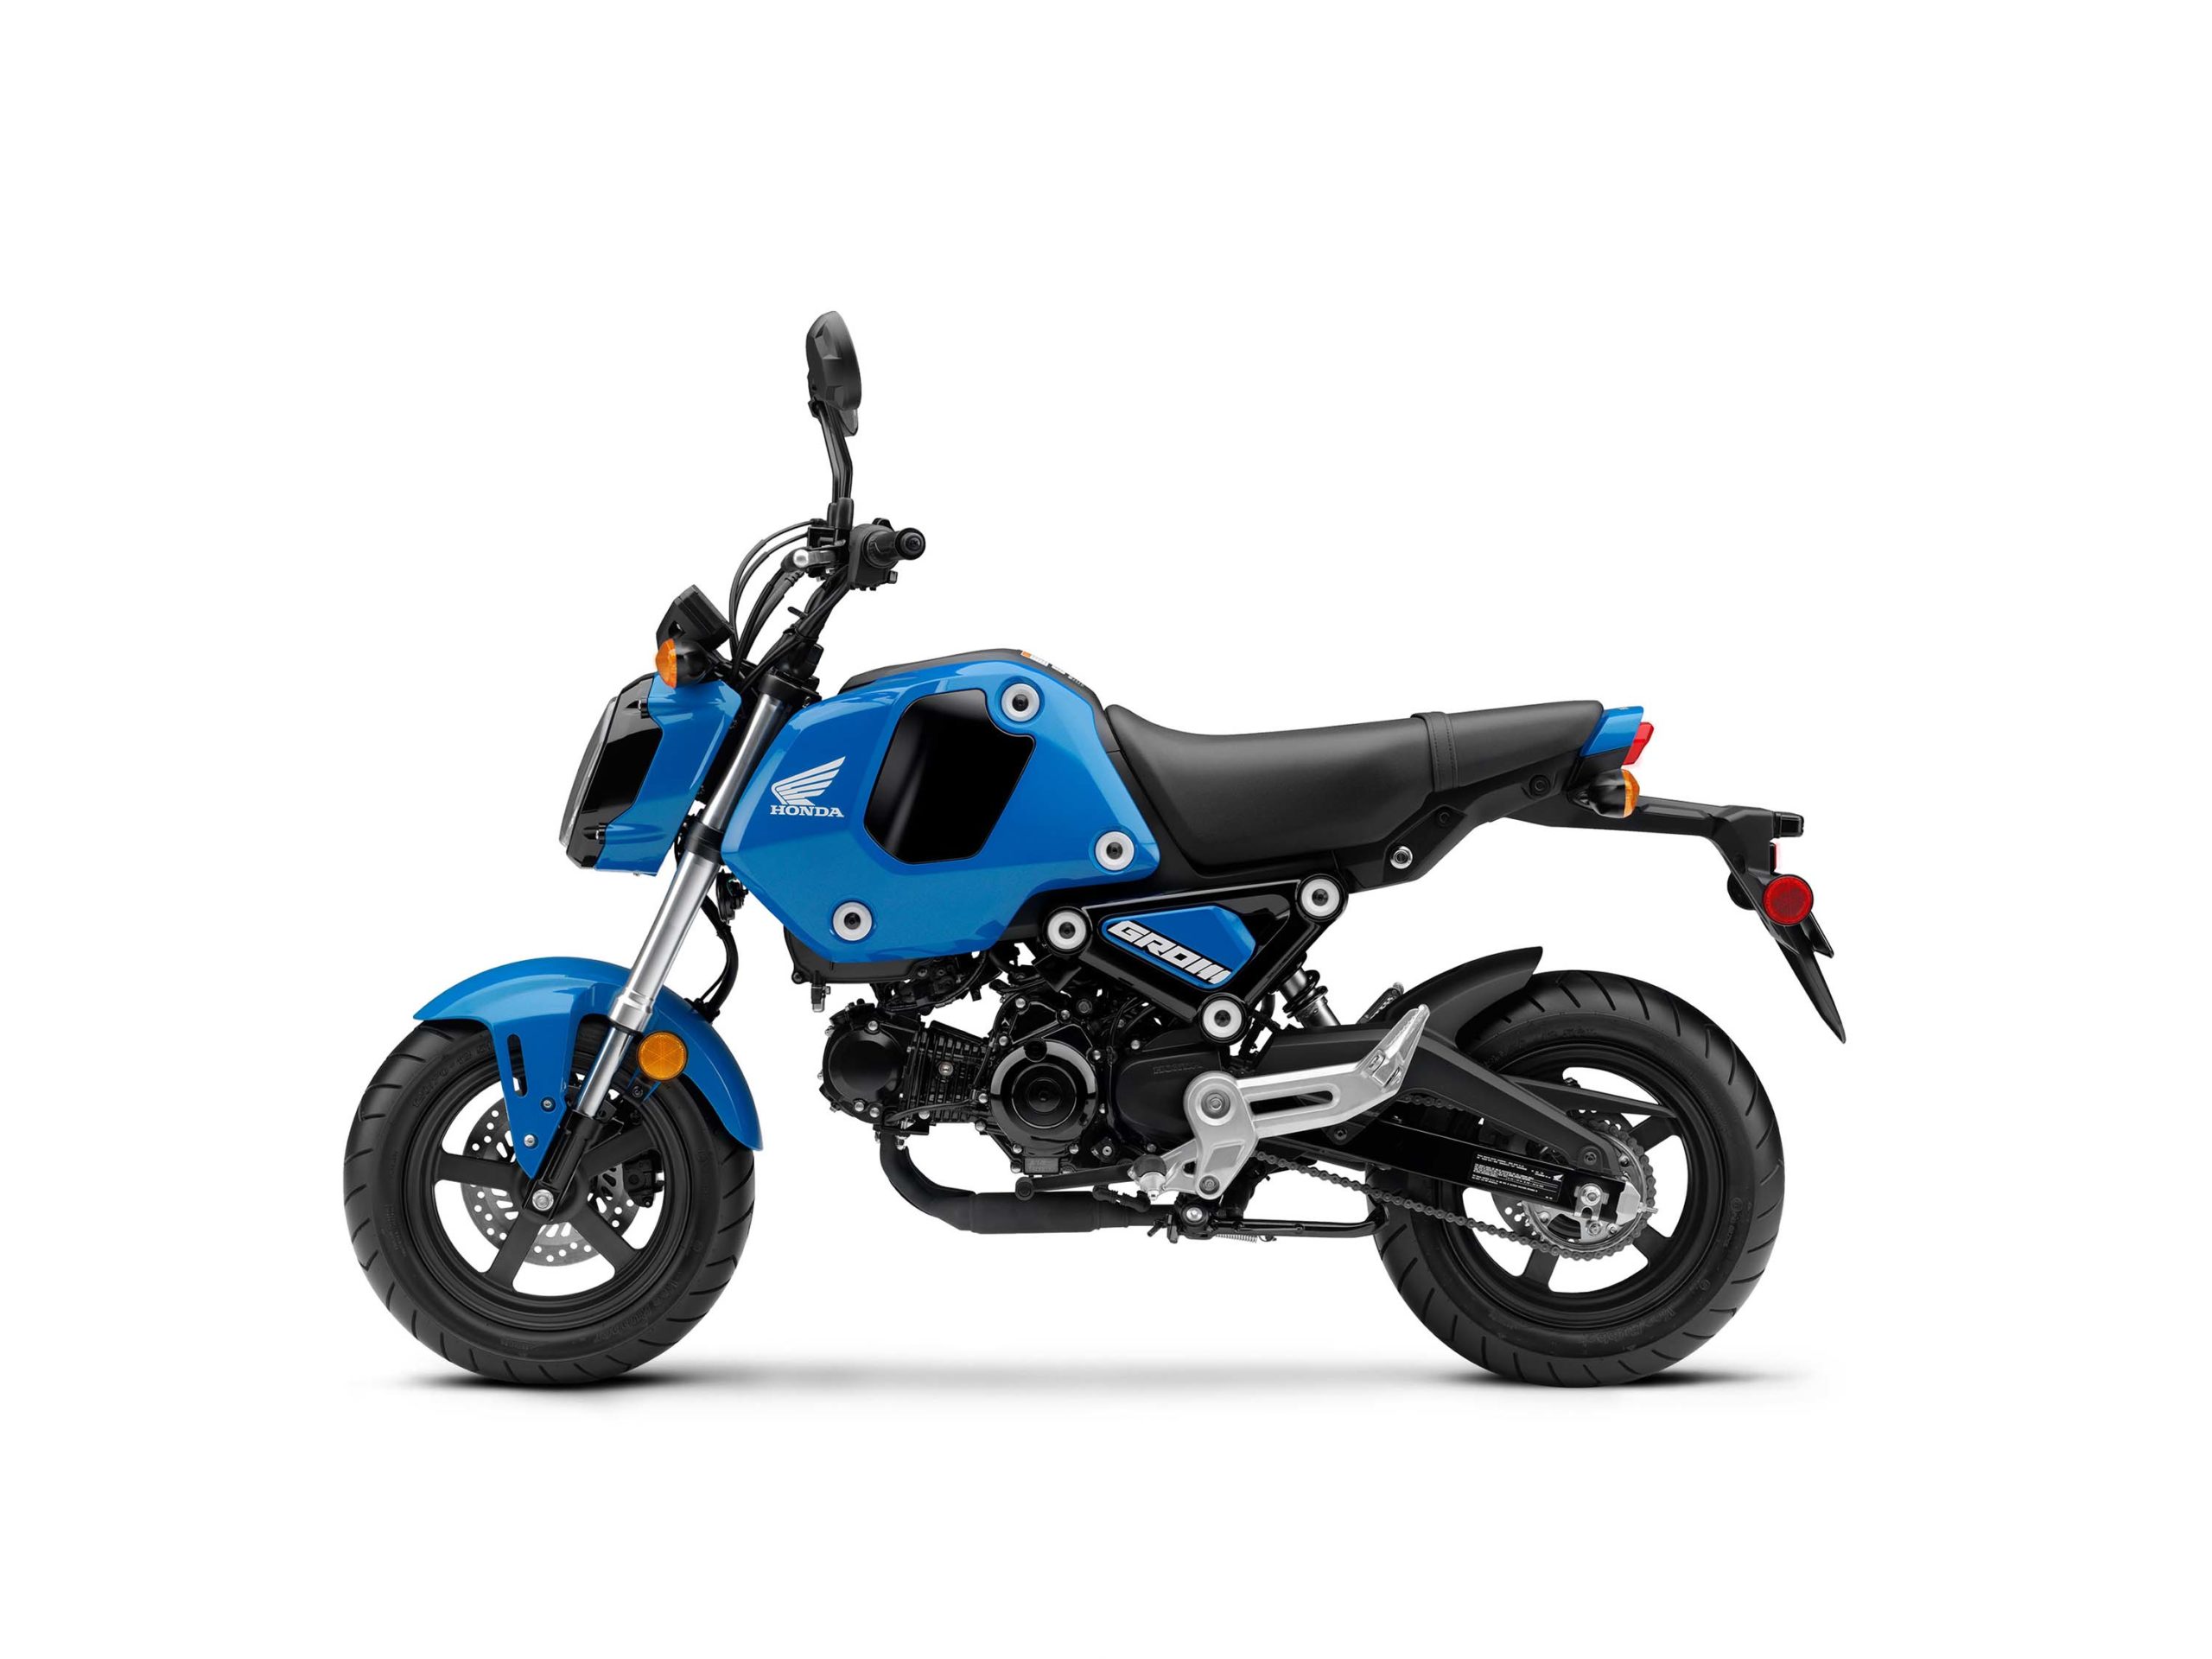 The Updated Honda Grom Finally Arrives in the USA as a 2022 Model